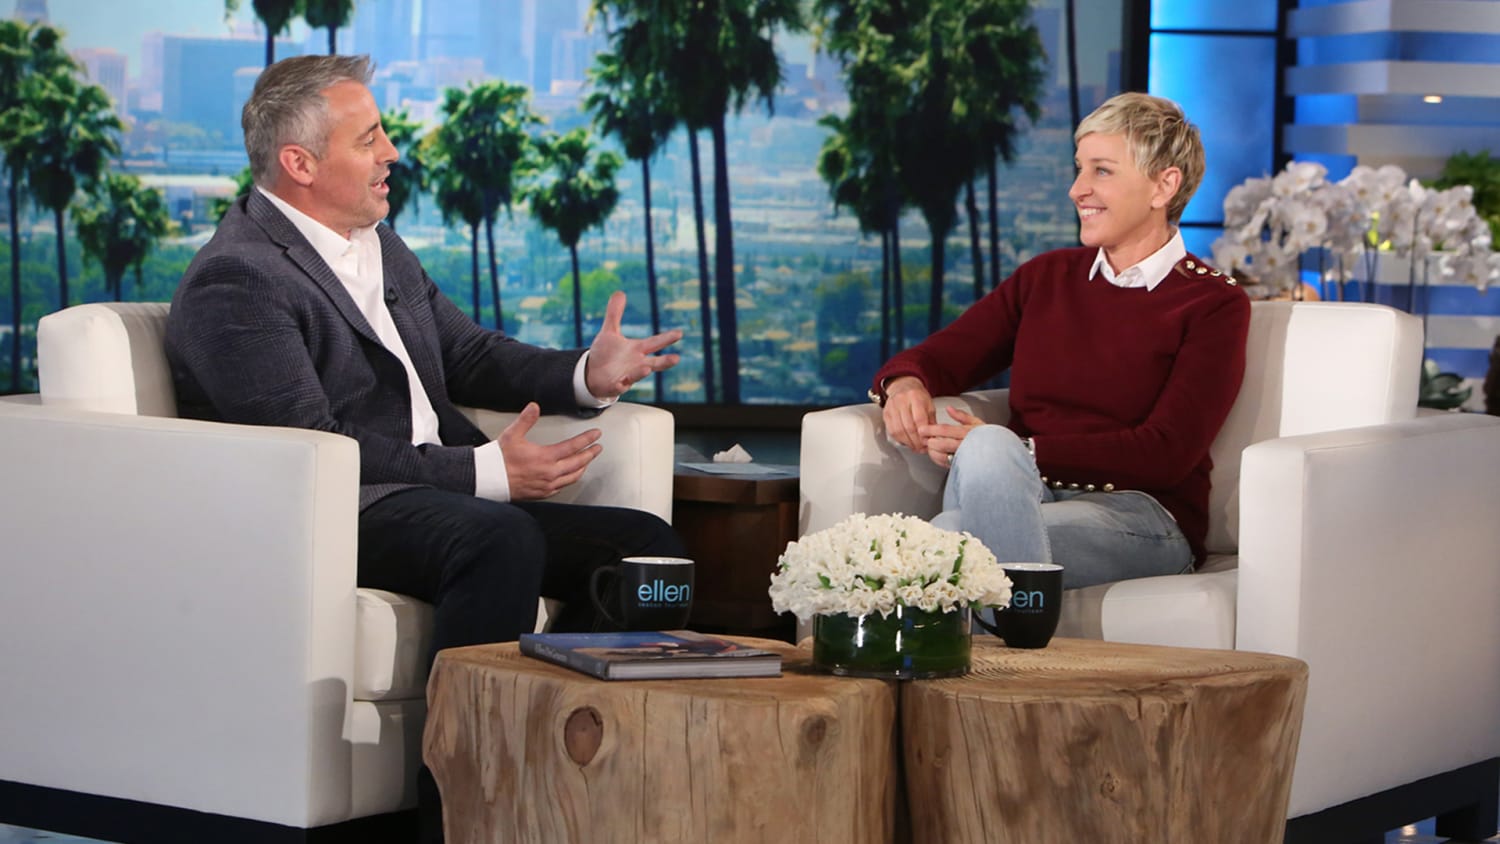 Matt LeBlanc says his daughter 'couldn't care less' about 'Friends'